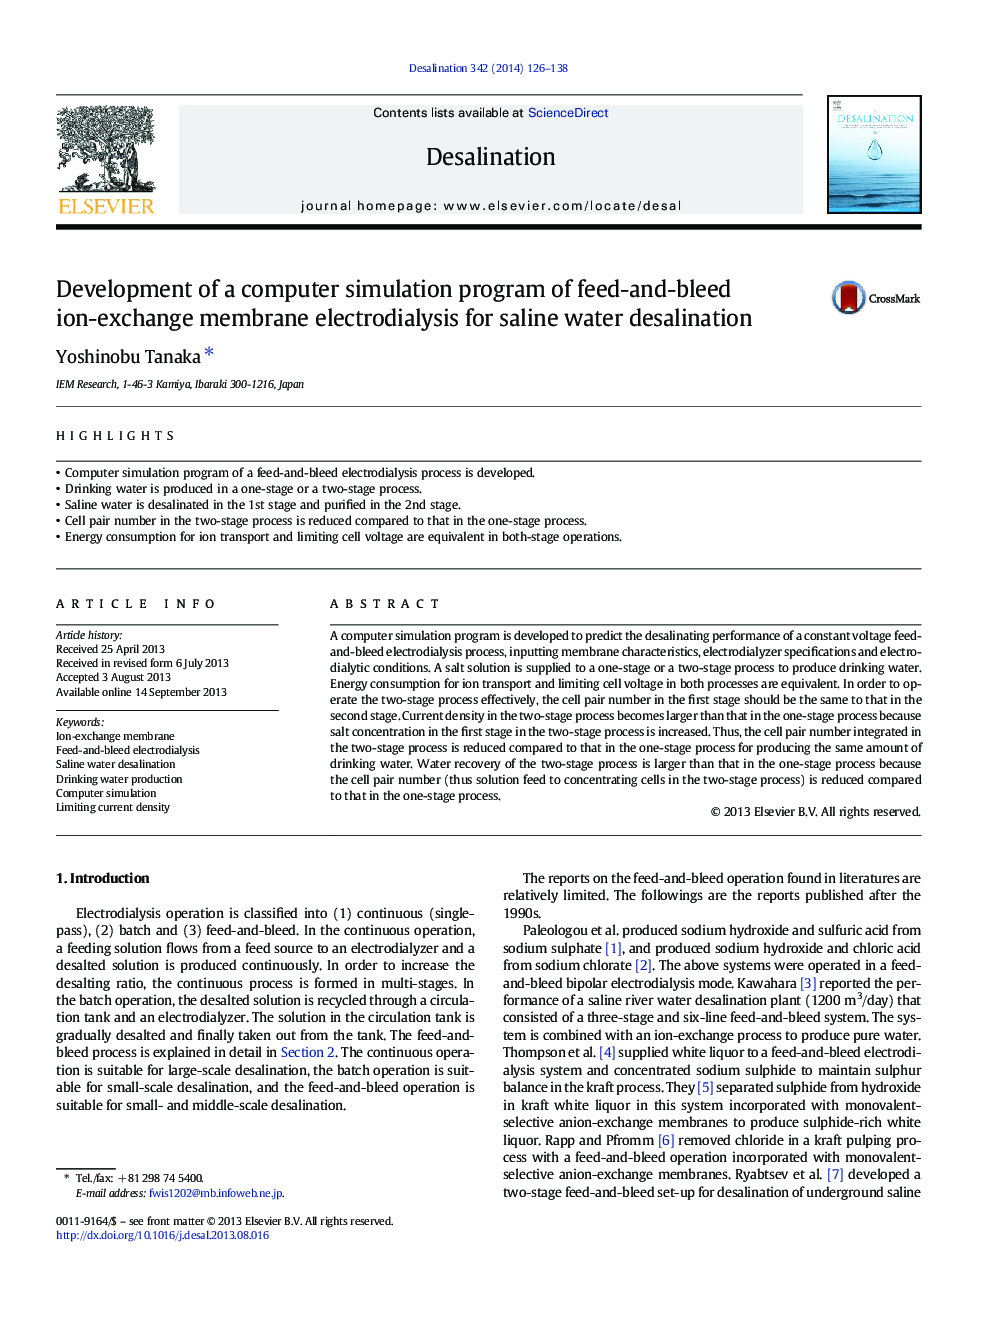 Development of a computer simulation program of feed-and-bleed ion-exchange membrane electrodialysis for saline water desalination